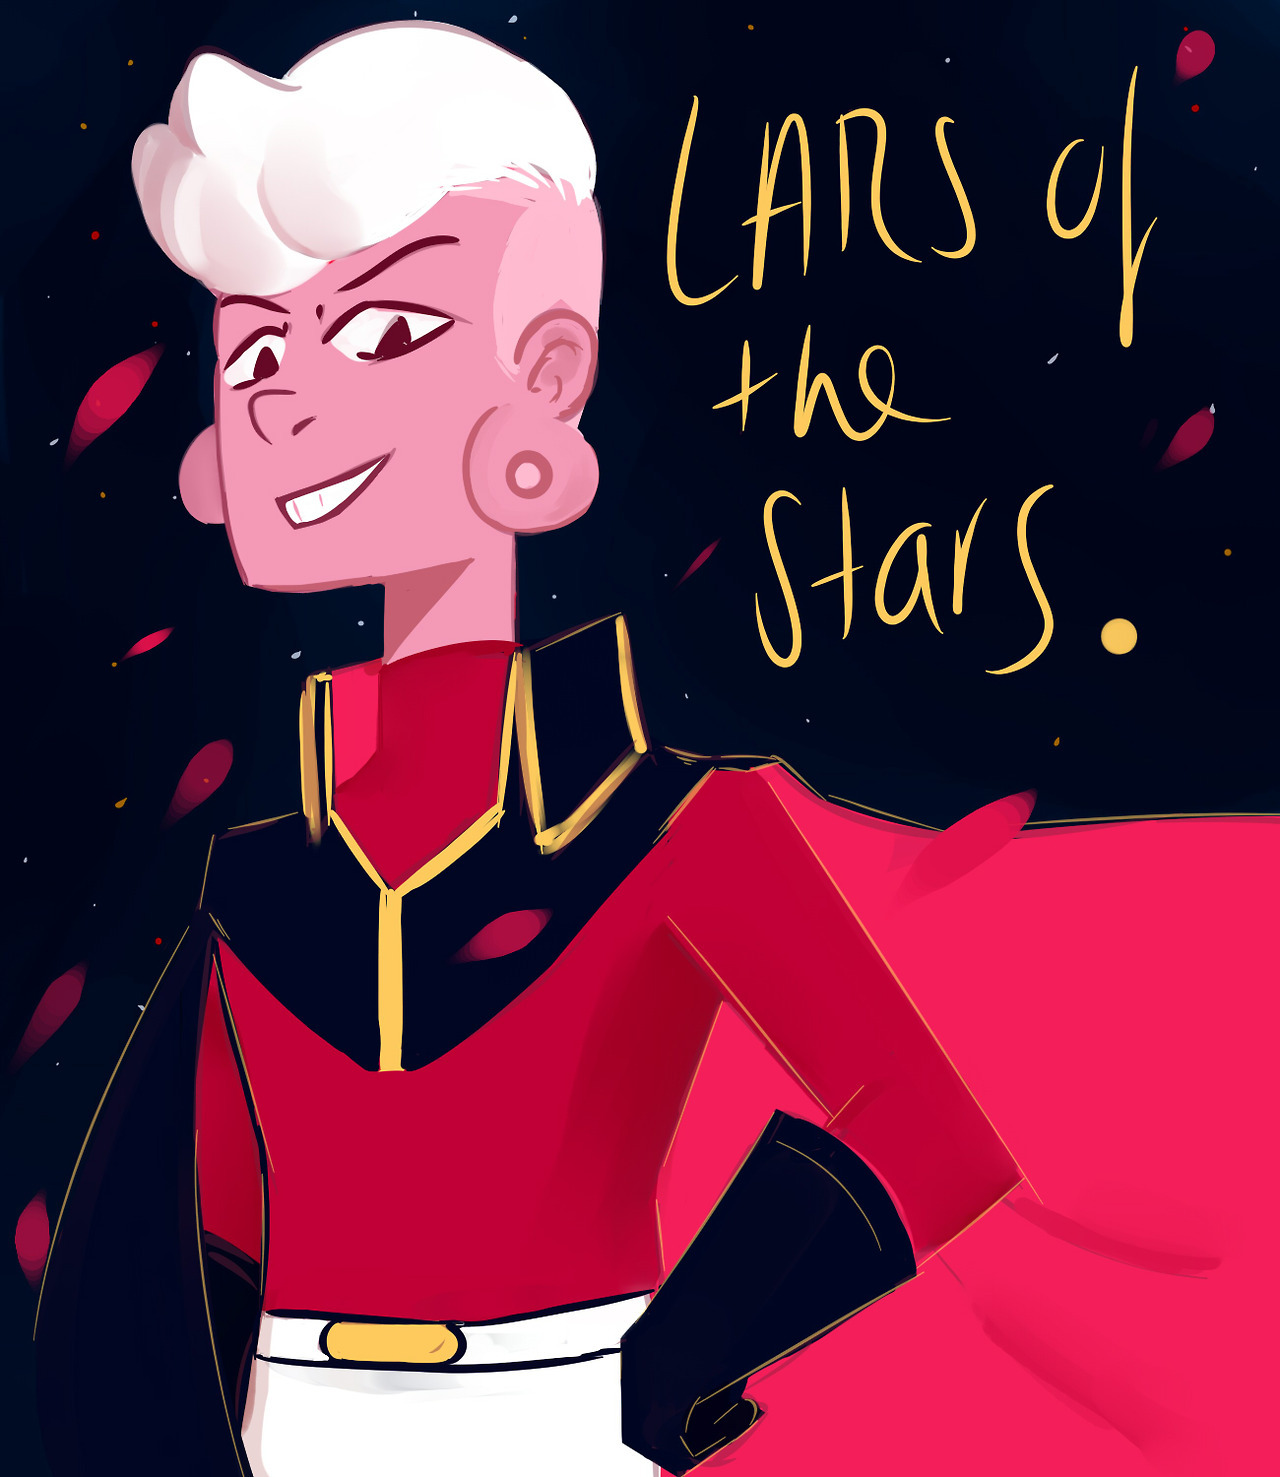 Lars of the stars; (A) Sqaridot ;and Emerald I can’t wait to see them in action.